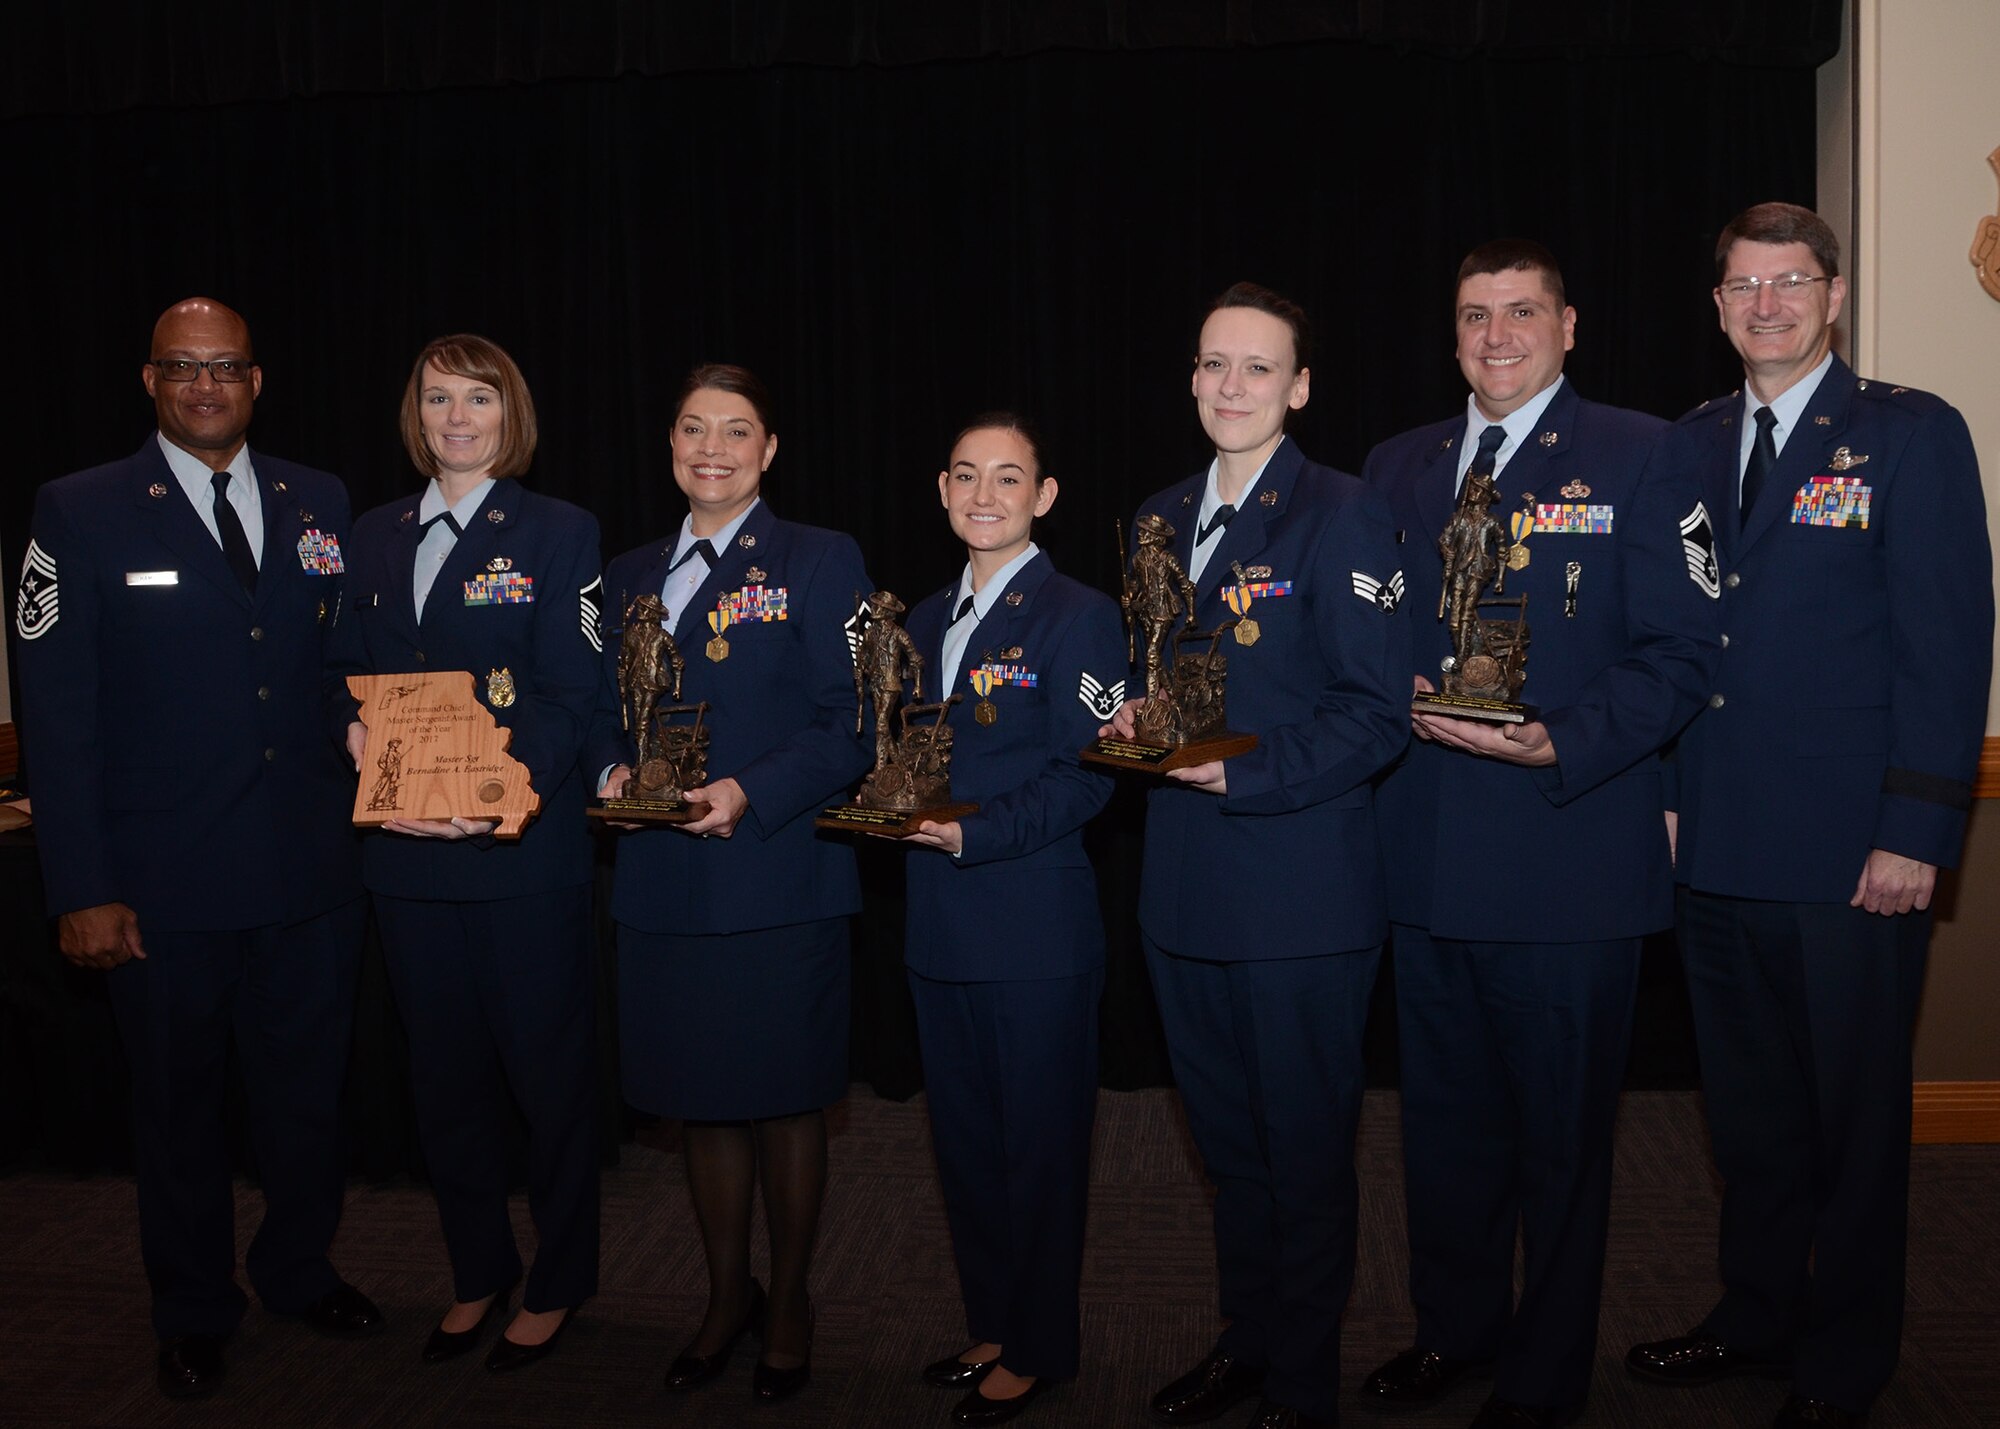 The Missouri Air National Guard 2017 Outstanding Airmen of the year are joined by Brig. Gen. Michael Francis, Missouri assistant adjutant general - Air, and Chief Master Sgt. Joseph Hamlett, the Missouri Air National Guard command chief. Pictured from left to right: Hamlett, Master Sgt. Bernadine Eastridge, (Missouri Air National Guard Command Chief Award winner) 139th Airlift Wing, Master Sgt. Kirsten Inwood, (First Sergeant of the Year) 131st Bomb Wing, Staff Sgt. Nanci Young, (NCO of the Year) 139th AW, Senior Airman Jael Watson, (Airman of the Year) 131st BW, Senior Master Sgt. Matthew Mullins, (Senior NCO of the Year) 139th AW, and Francis.